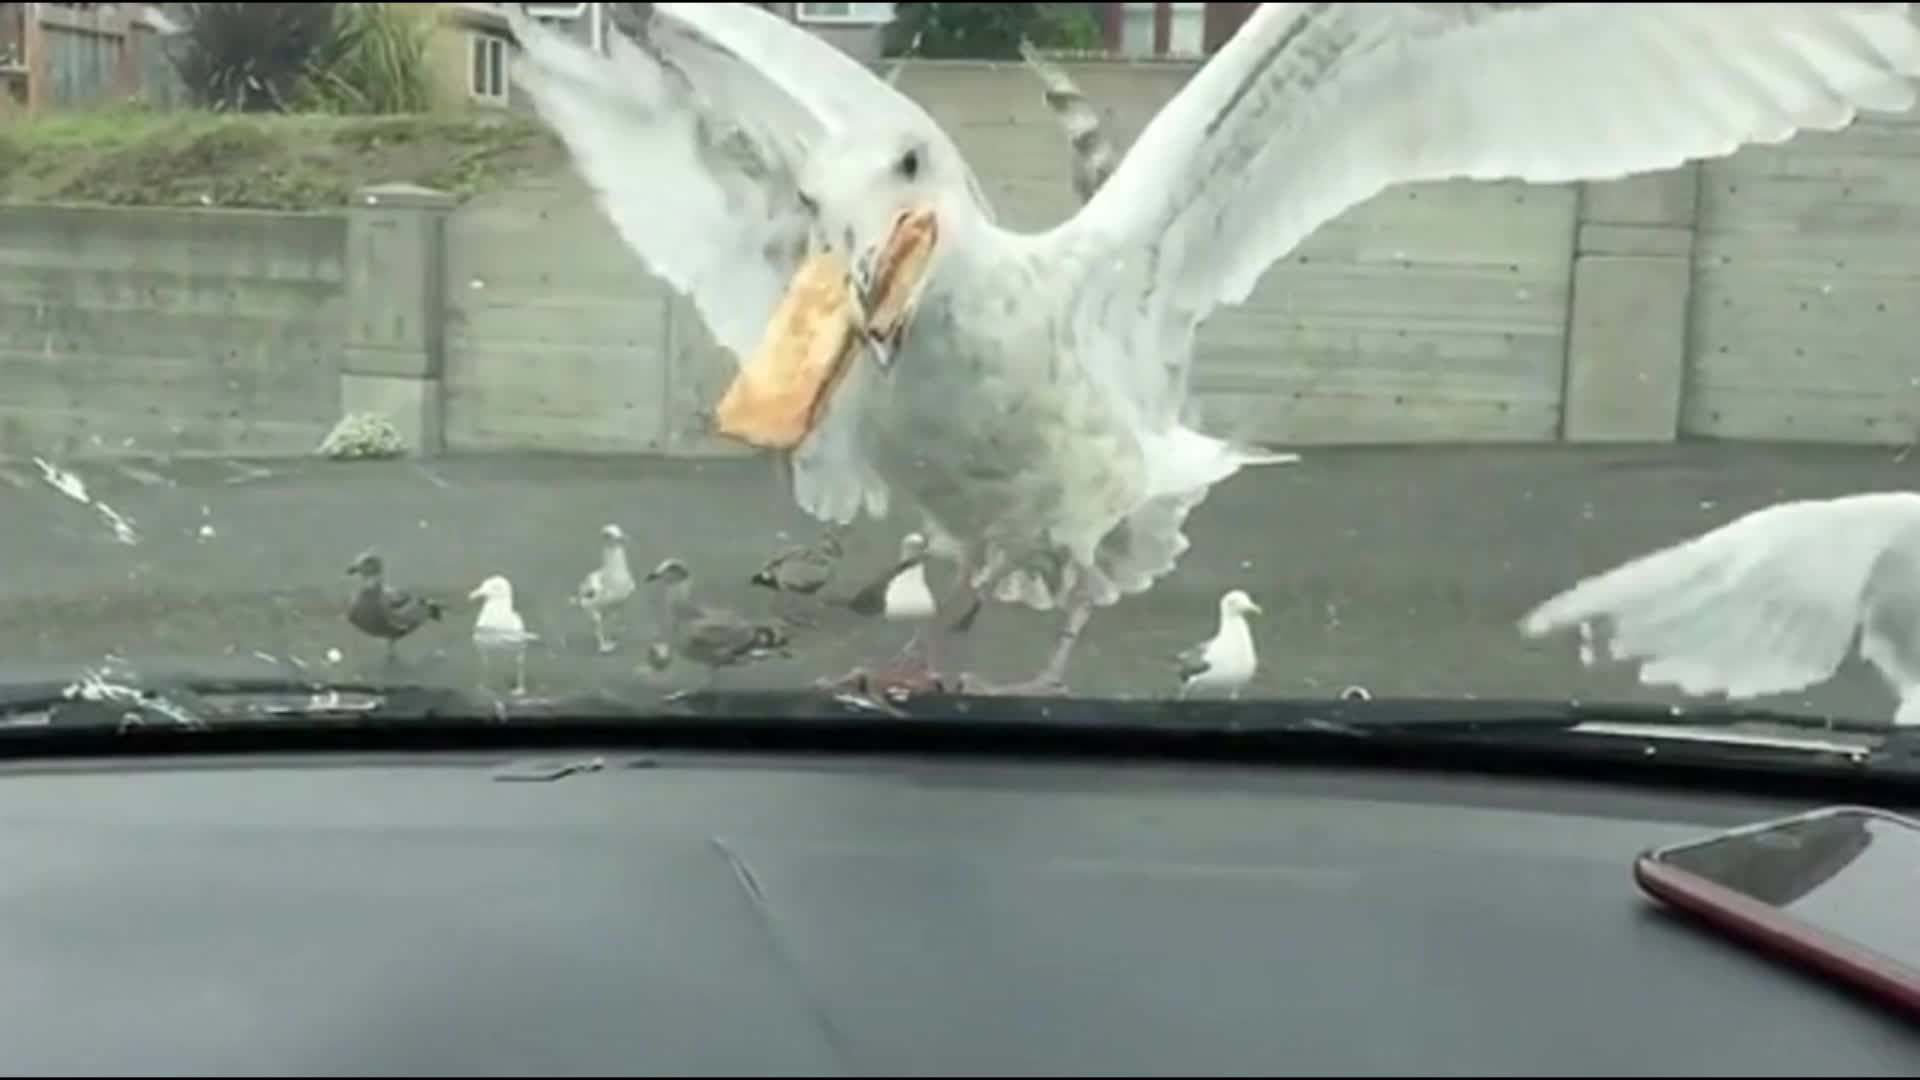 The hungry gull swallowed an entire apple pie into its mouth